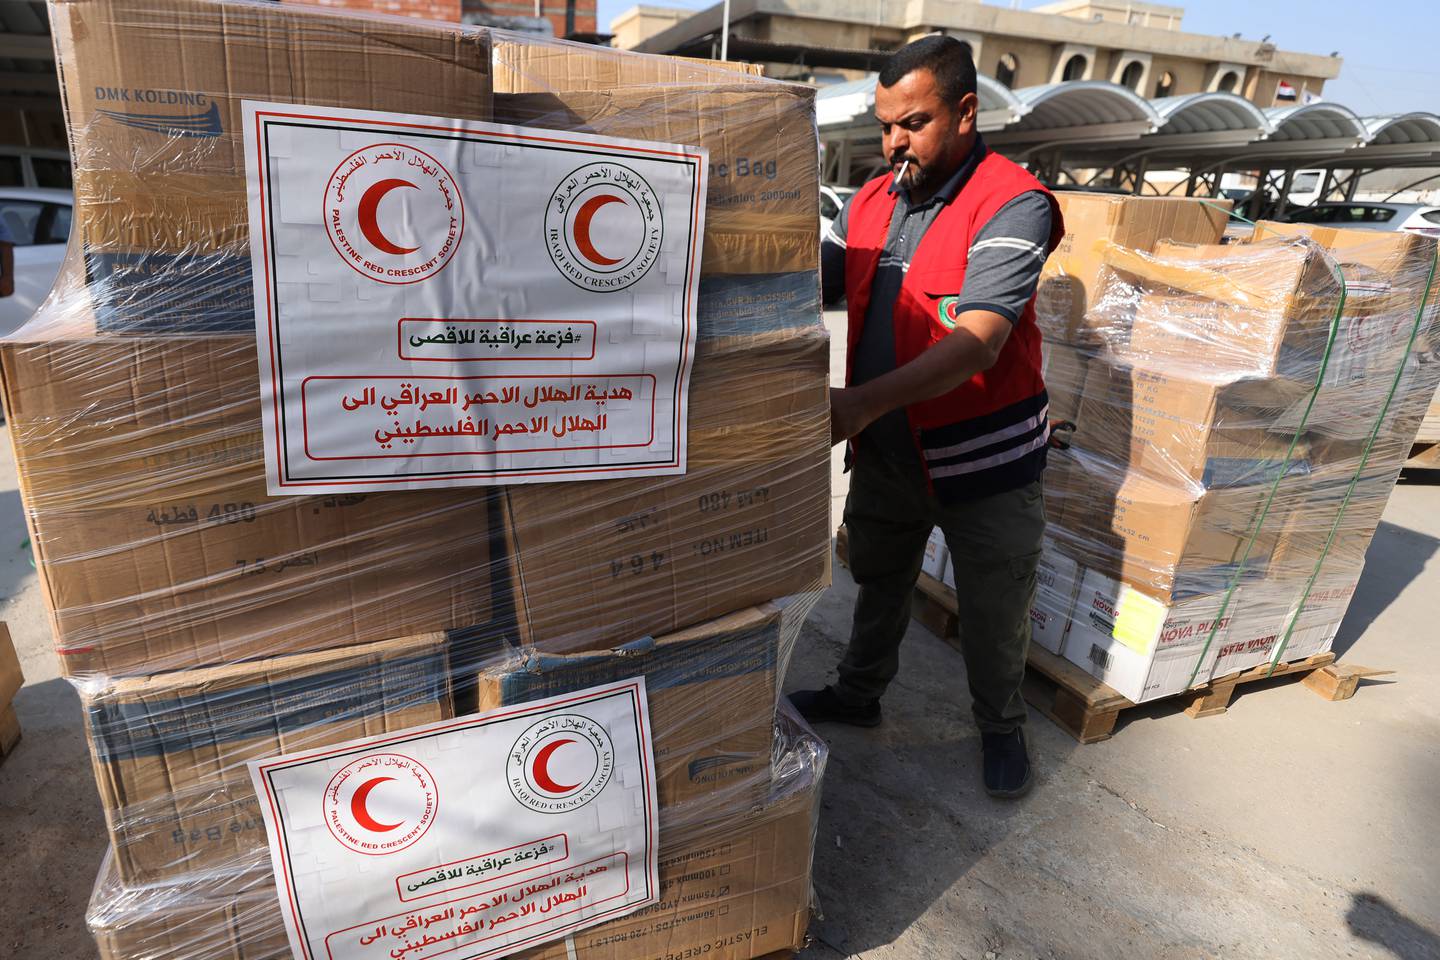 Employees Of The Iraqi Red Crescent Society Prepare Boxes Of Humanitarian Aid Intended For Egypt, To Be Distributed To Palestinians In The Gaza Strip, At The Organization'S Headquarters In Baghdad.